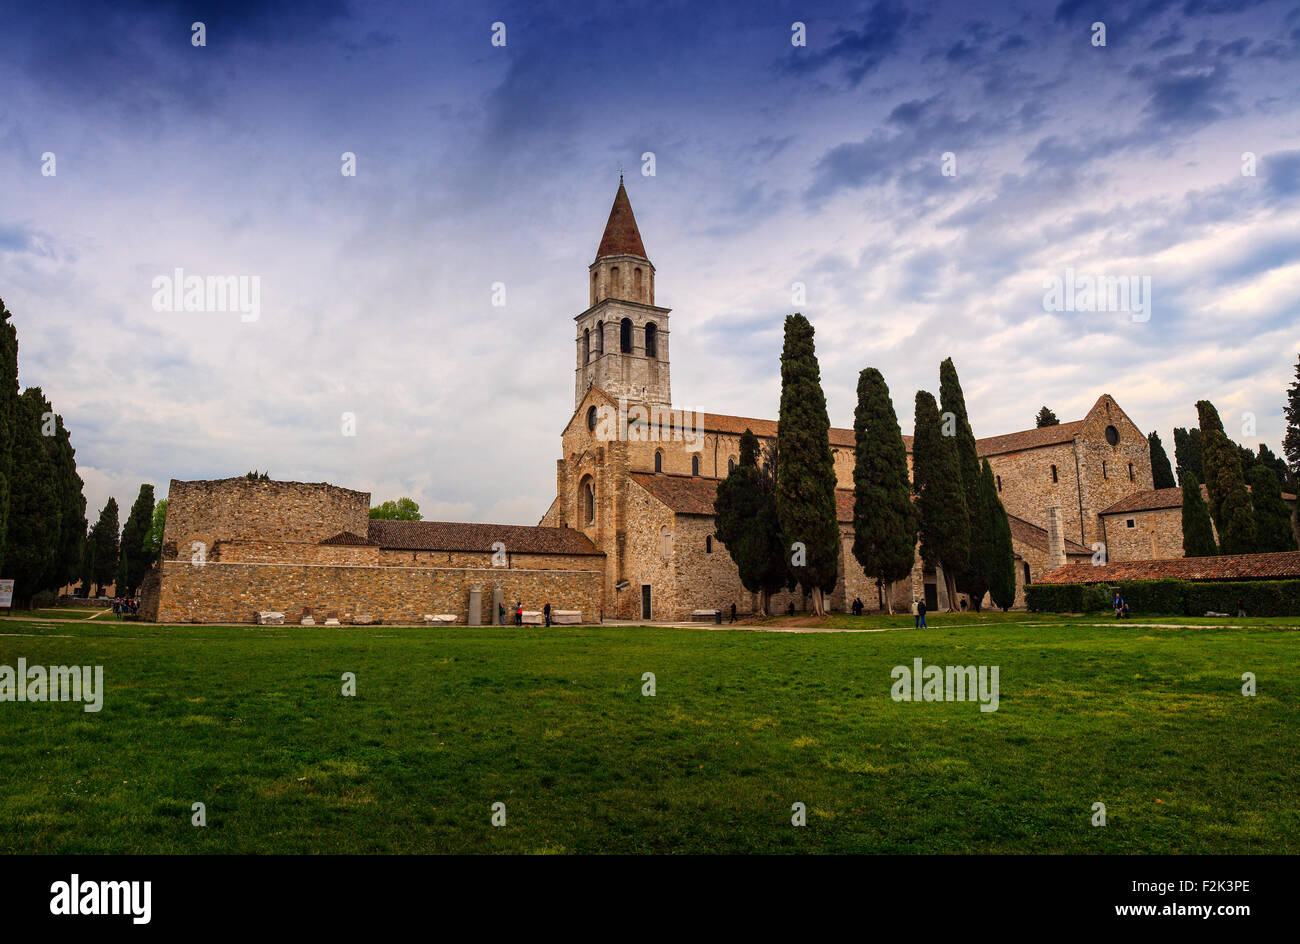 View of Basilica di Santa Maria Assunta and bell tower of Aquileia, Italy. Aquileia is UNESCO World Heritage Site Stock Photo